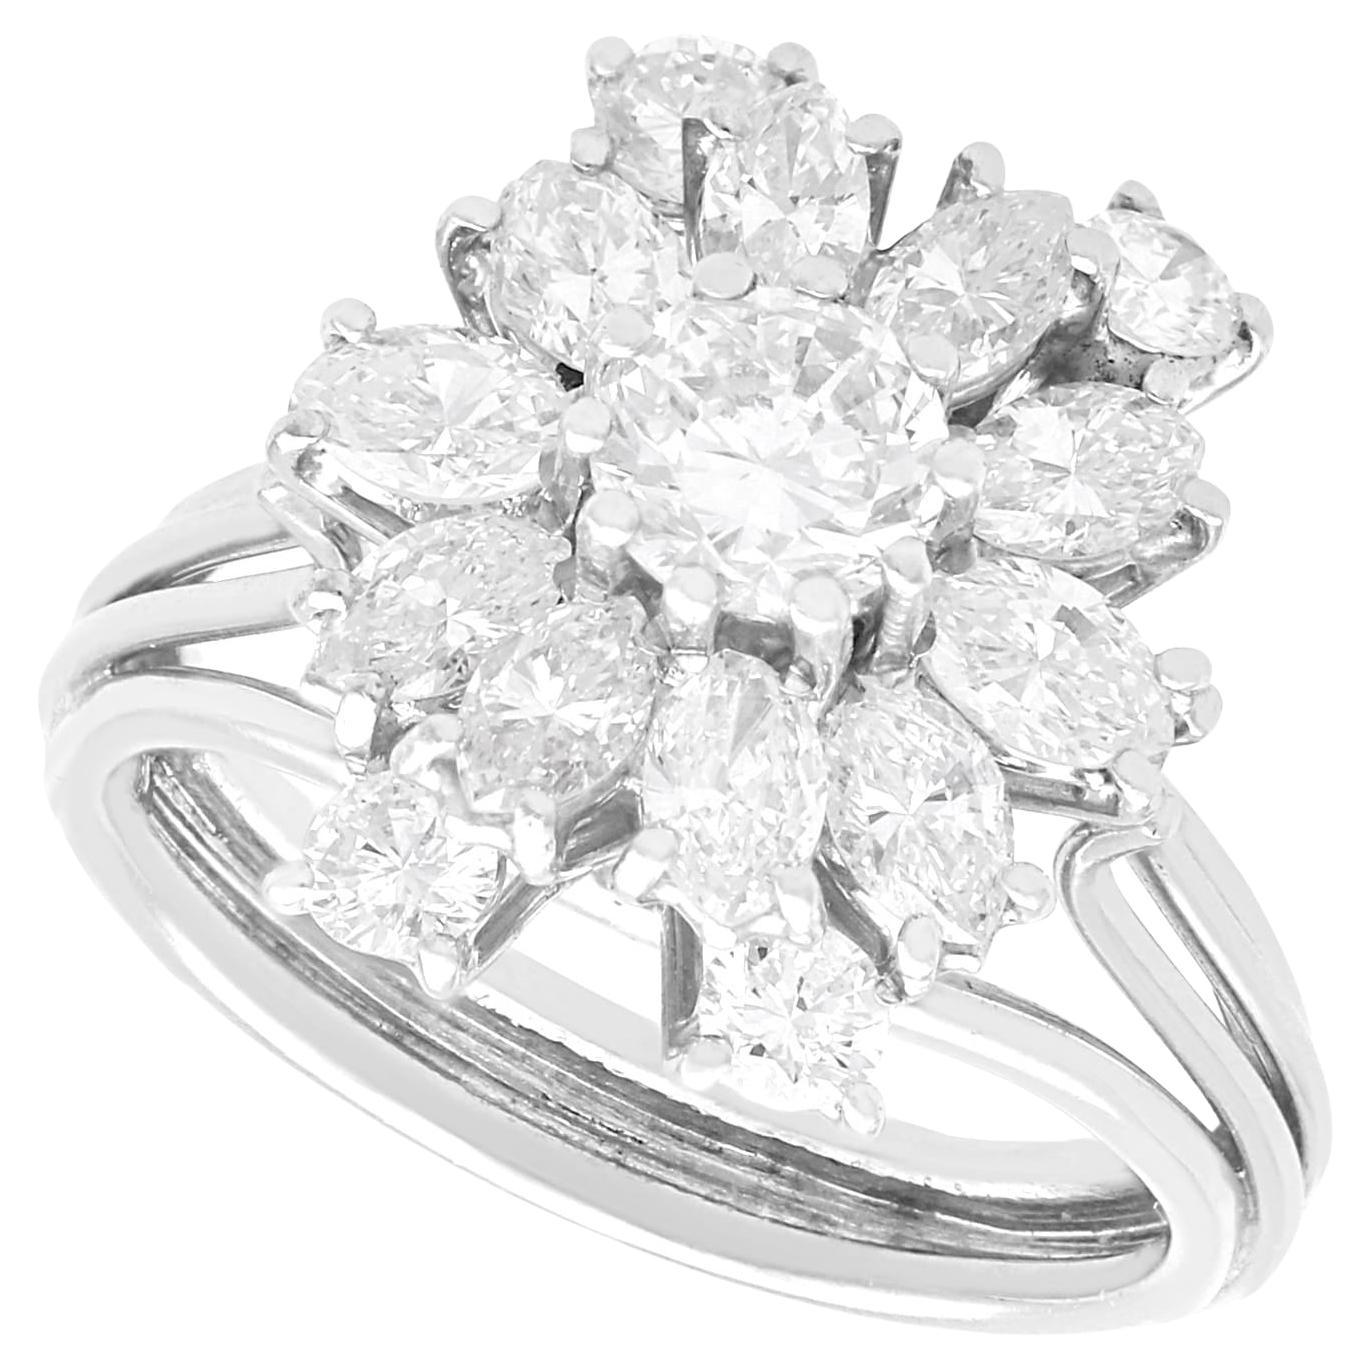 1950s 2.76 Carat Diamond and Platinum Engagement Ring For Sale